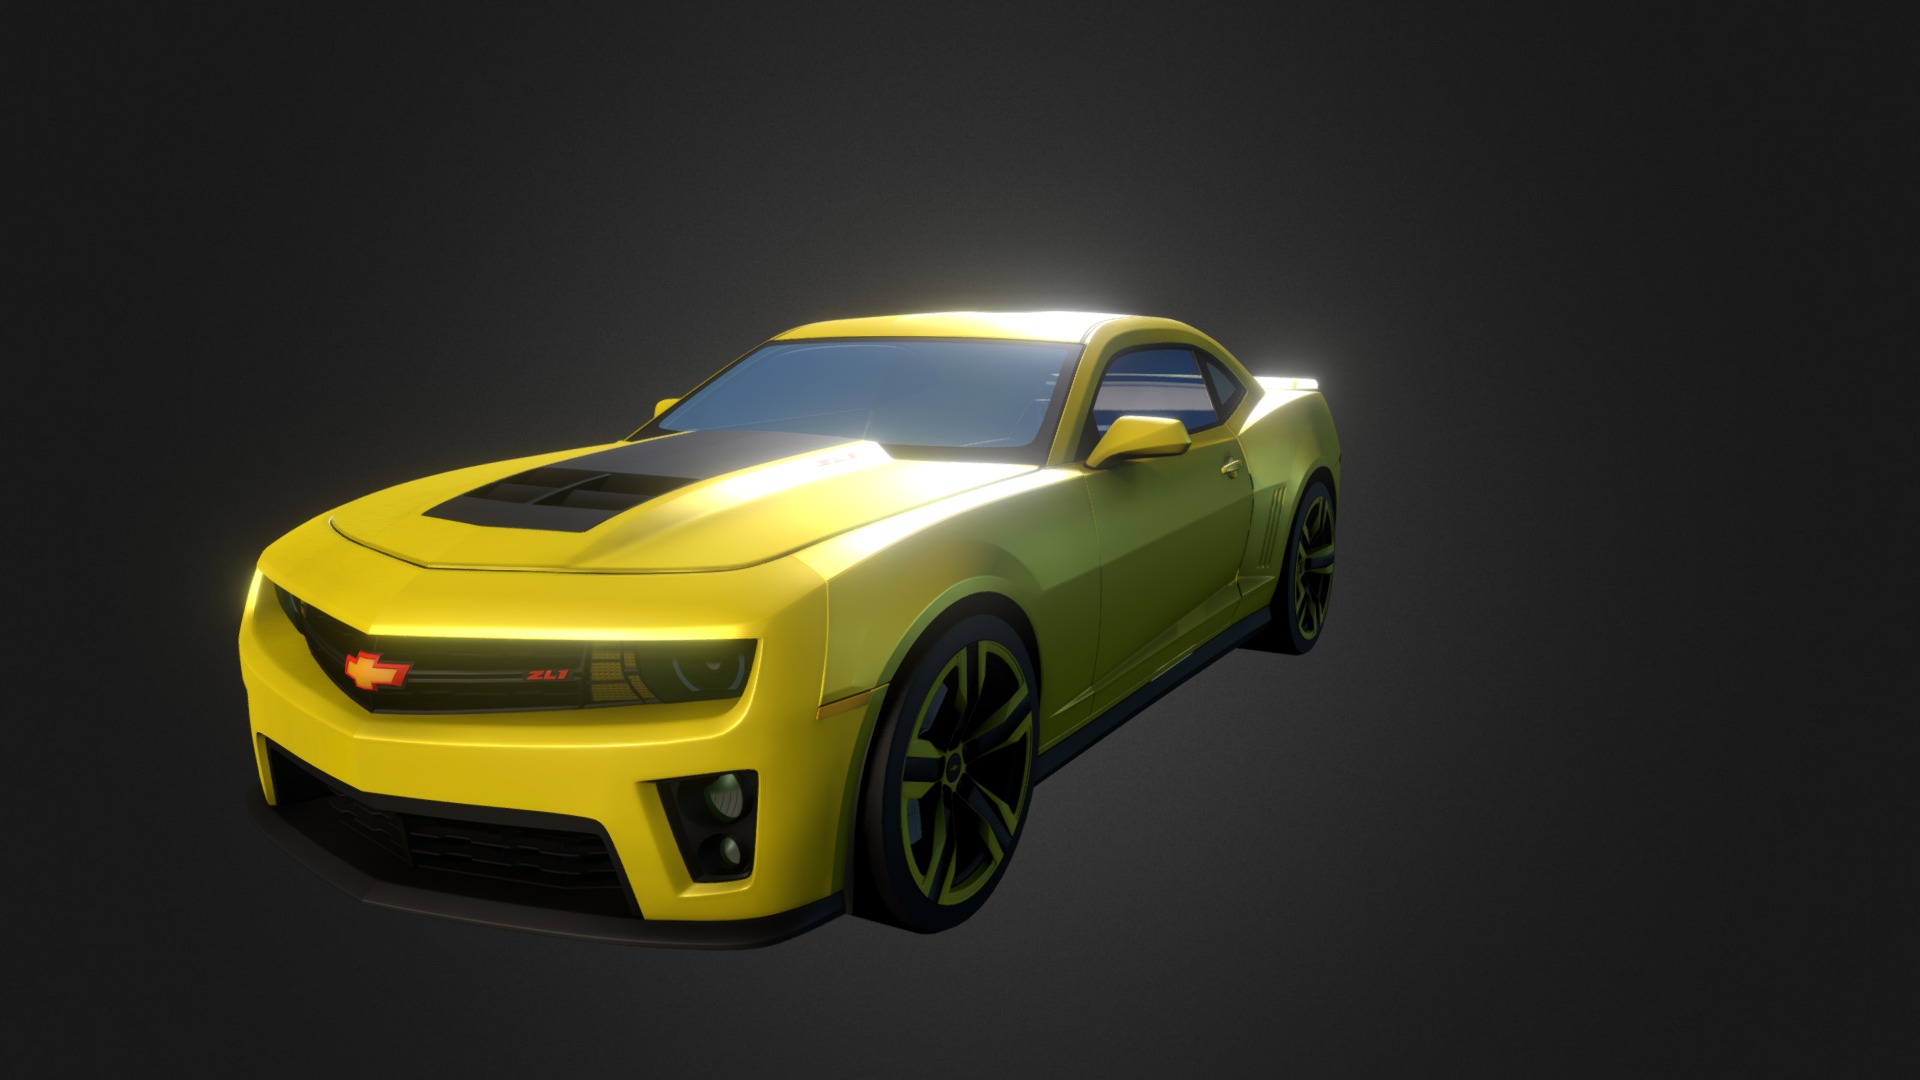 3D model 2012 Chevrolet Camaro ZL1 - This is a 3D model of the 2012 Chevrolet Camaro ZL1. The 3D model is about a yellow sports car.